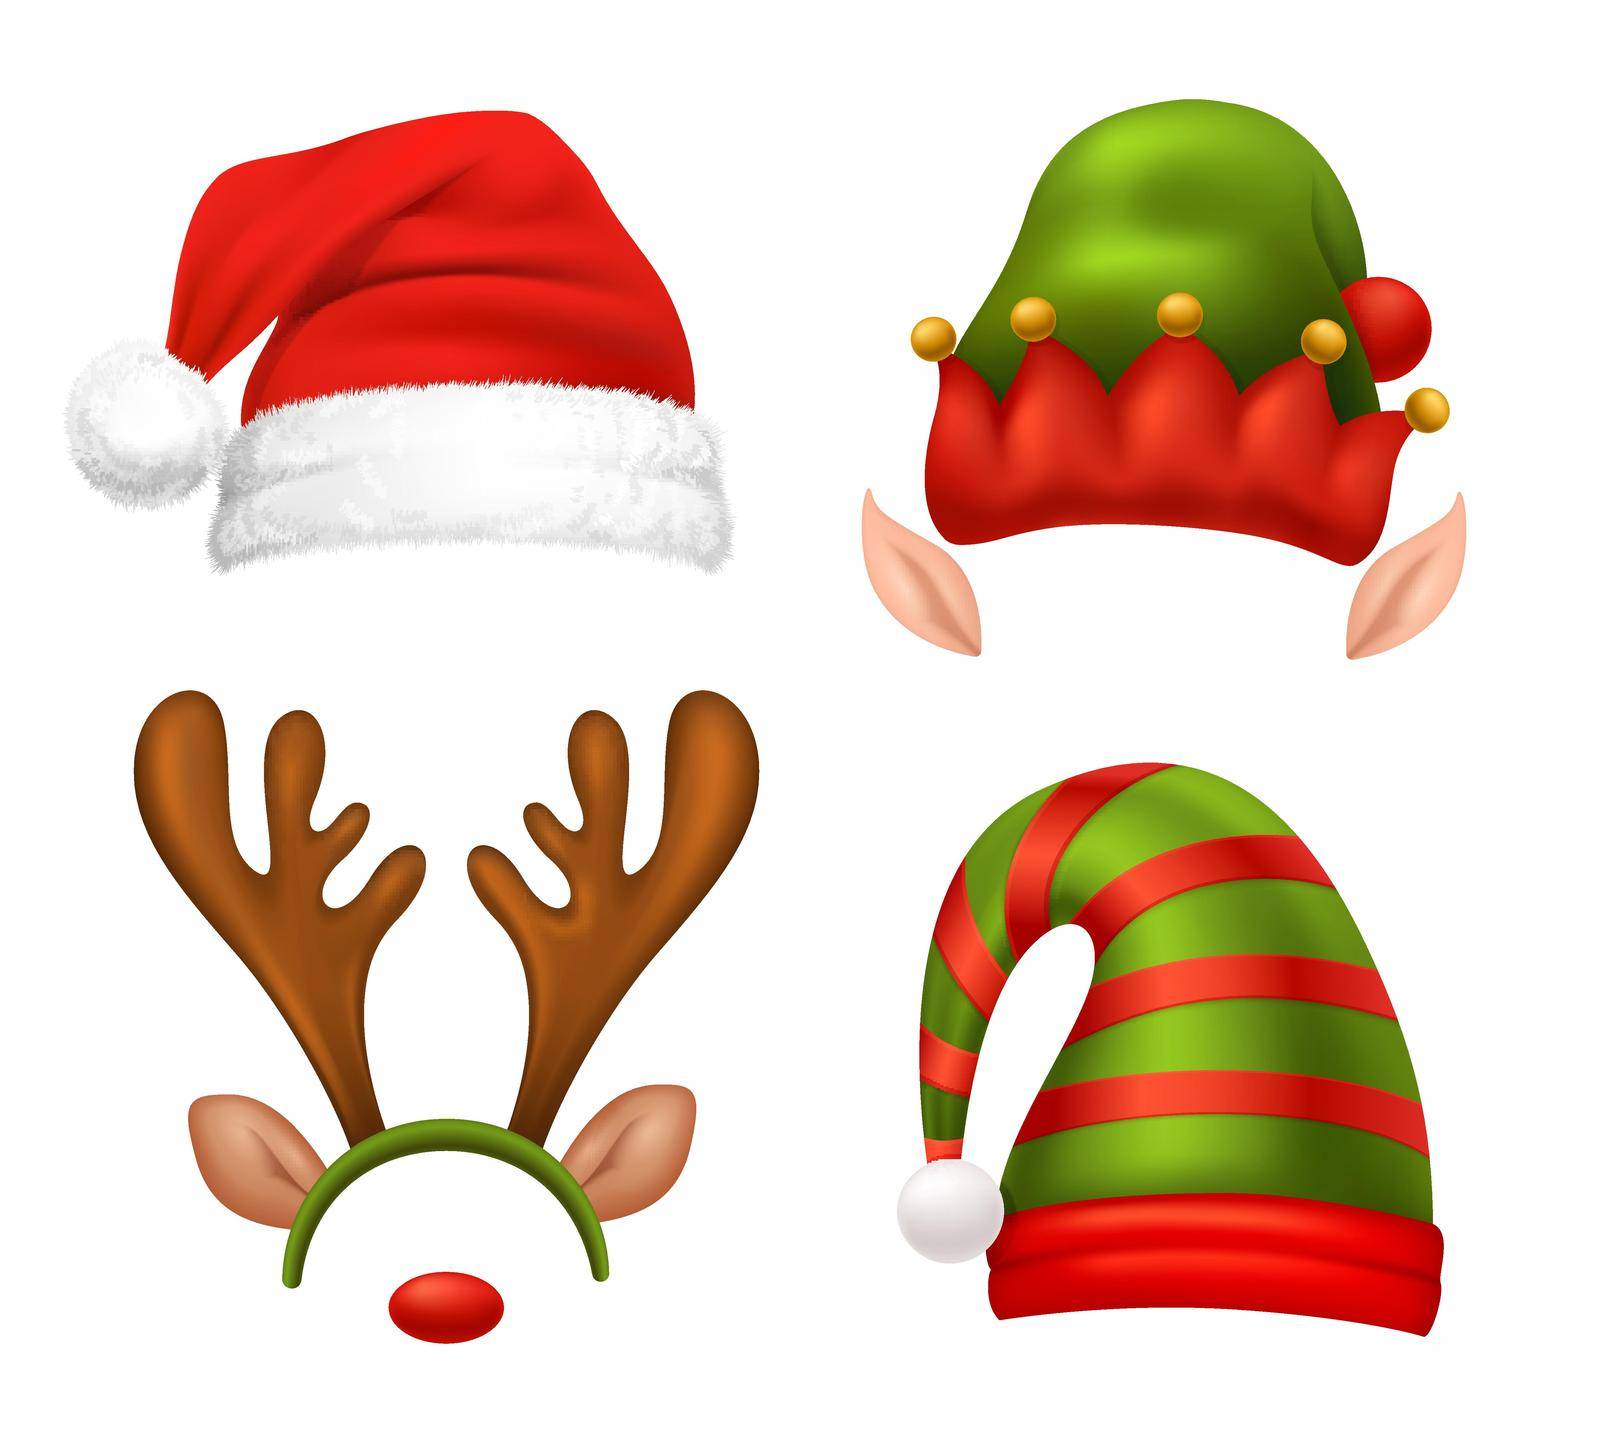  Santa Claus concept icons set with Christmas symbols realistic isolated vector illustration